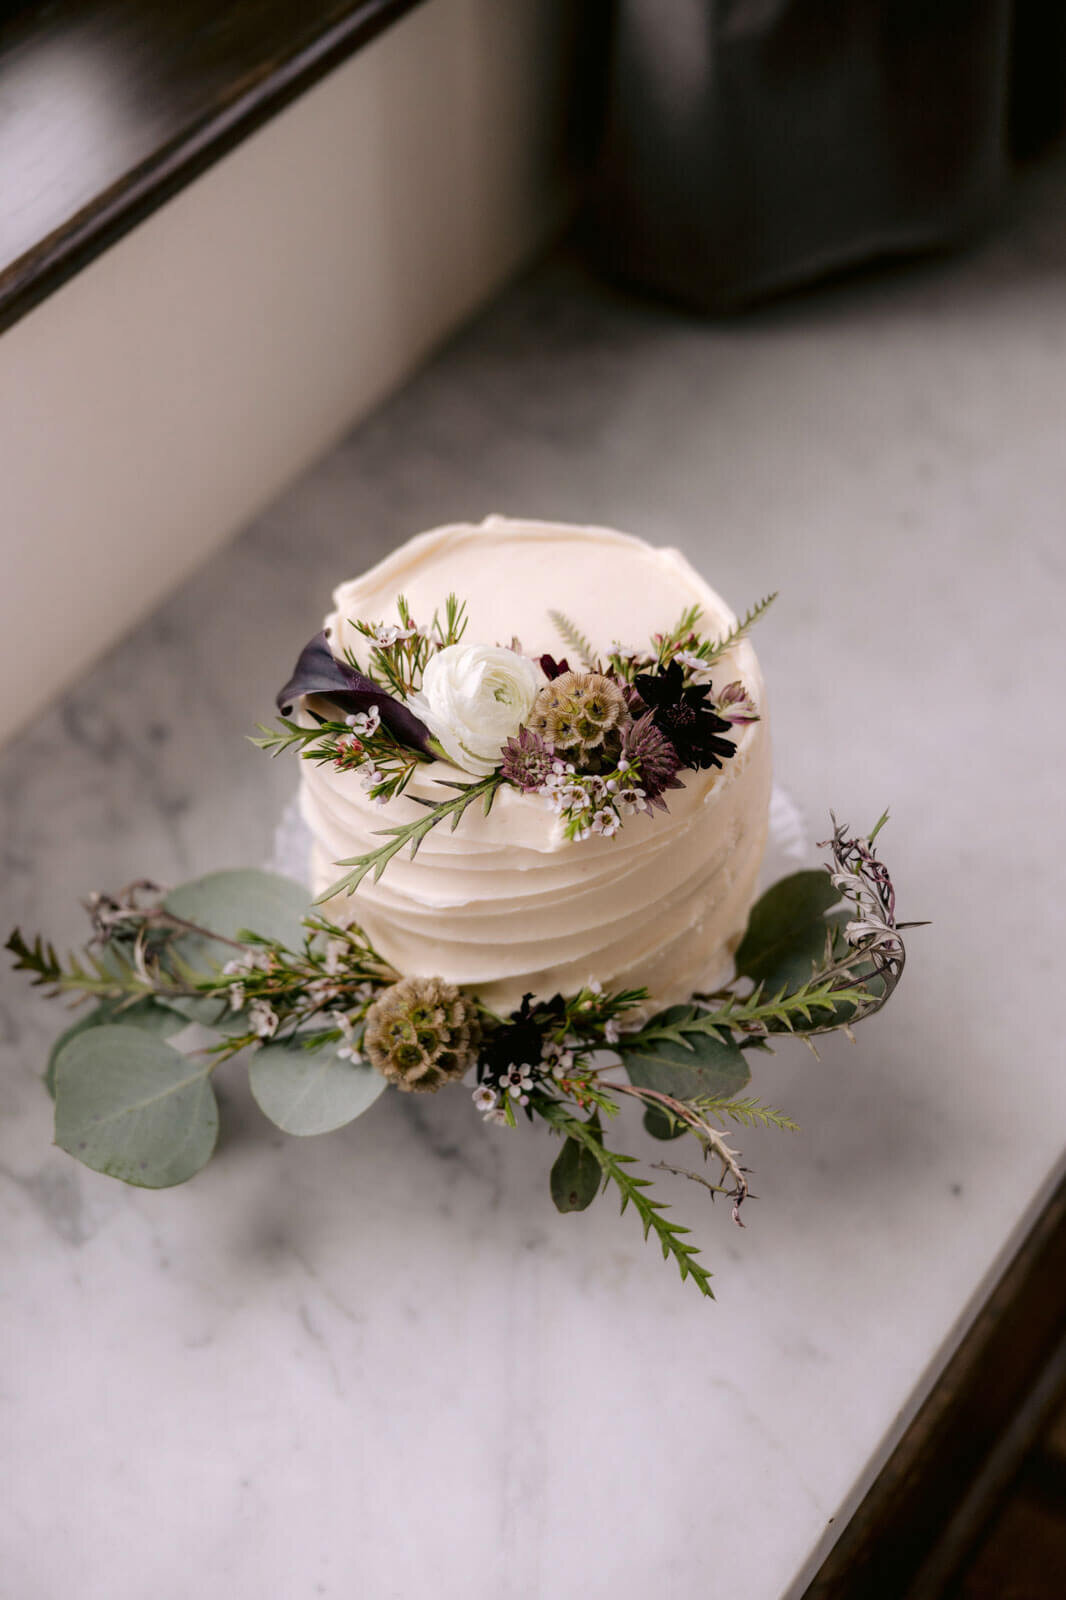 A small white wedding cake with flowers and leaves on top and at the bottom.